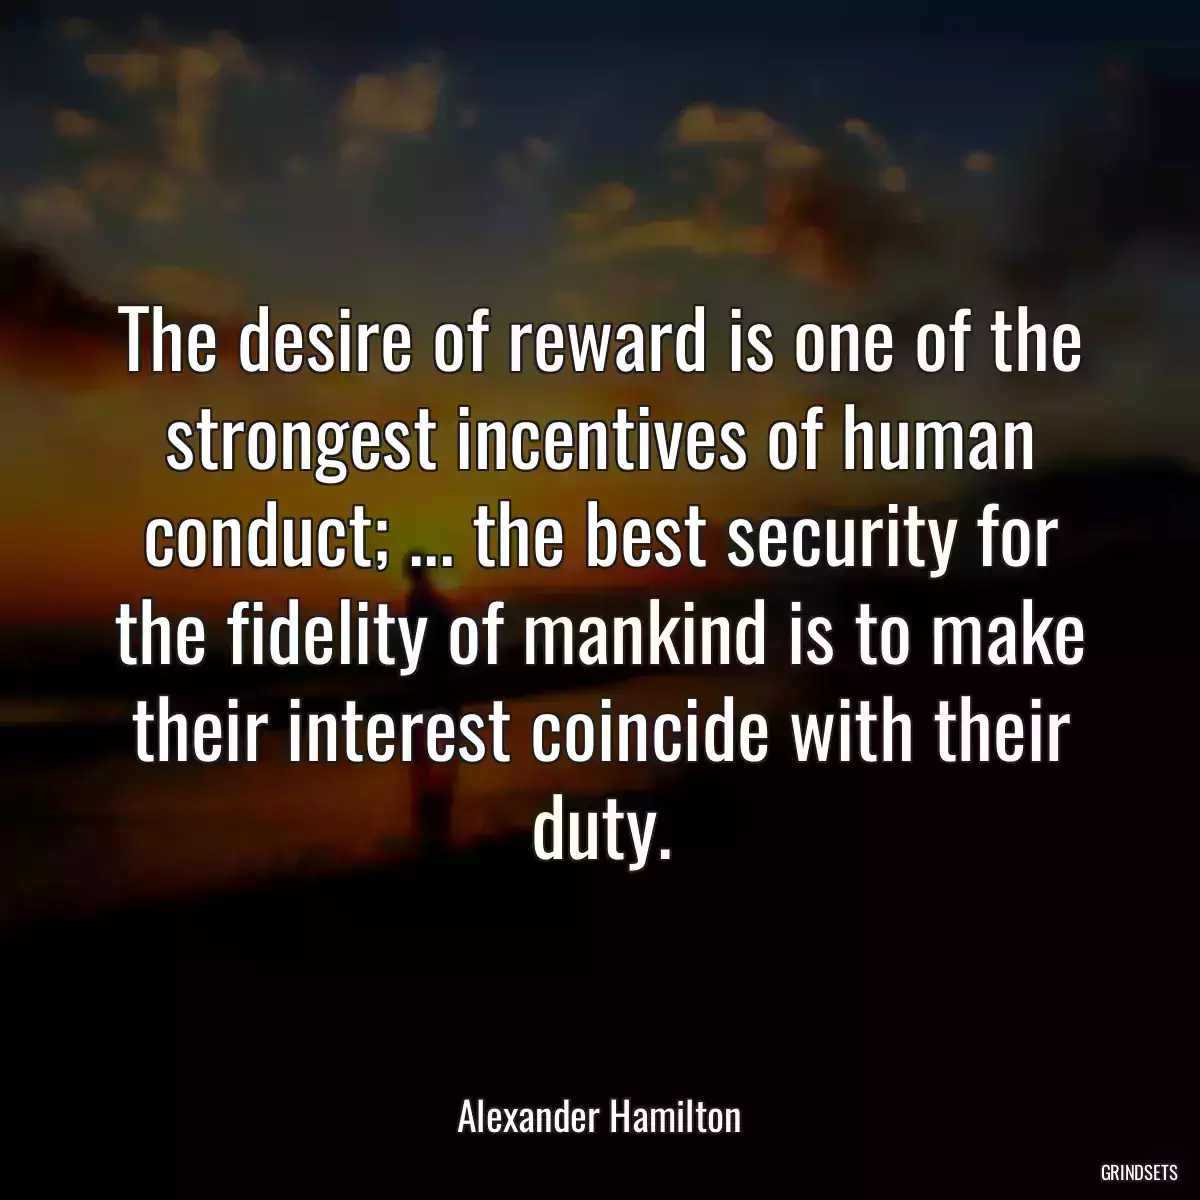 The desire of reward is one of the strongest incentives of human conduct; ... the best security for the fidelity of mankind is to make their interest coincide with their duty.